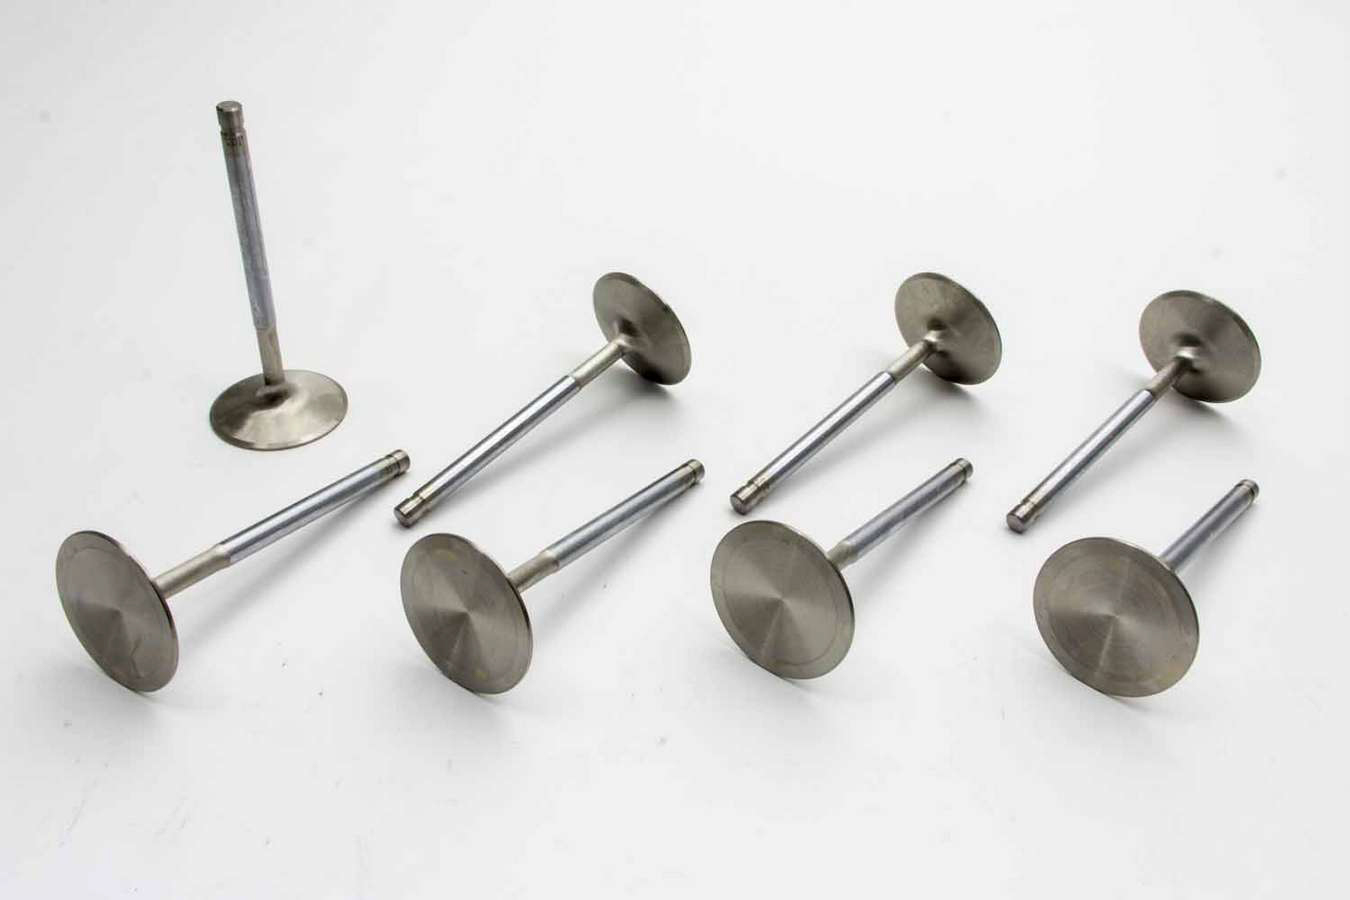 Intake Valve, Race Master, 2.000 in Head, Hollow Stem, Stainless, LS1, LS6 / LS2, GM LS-Series, Set of 8